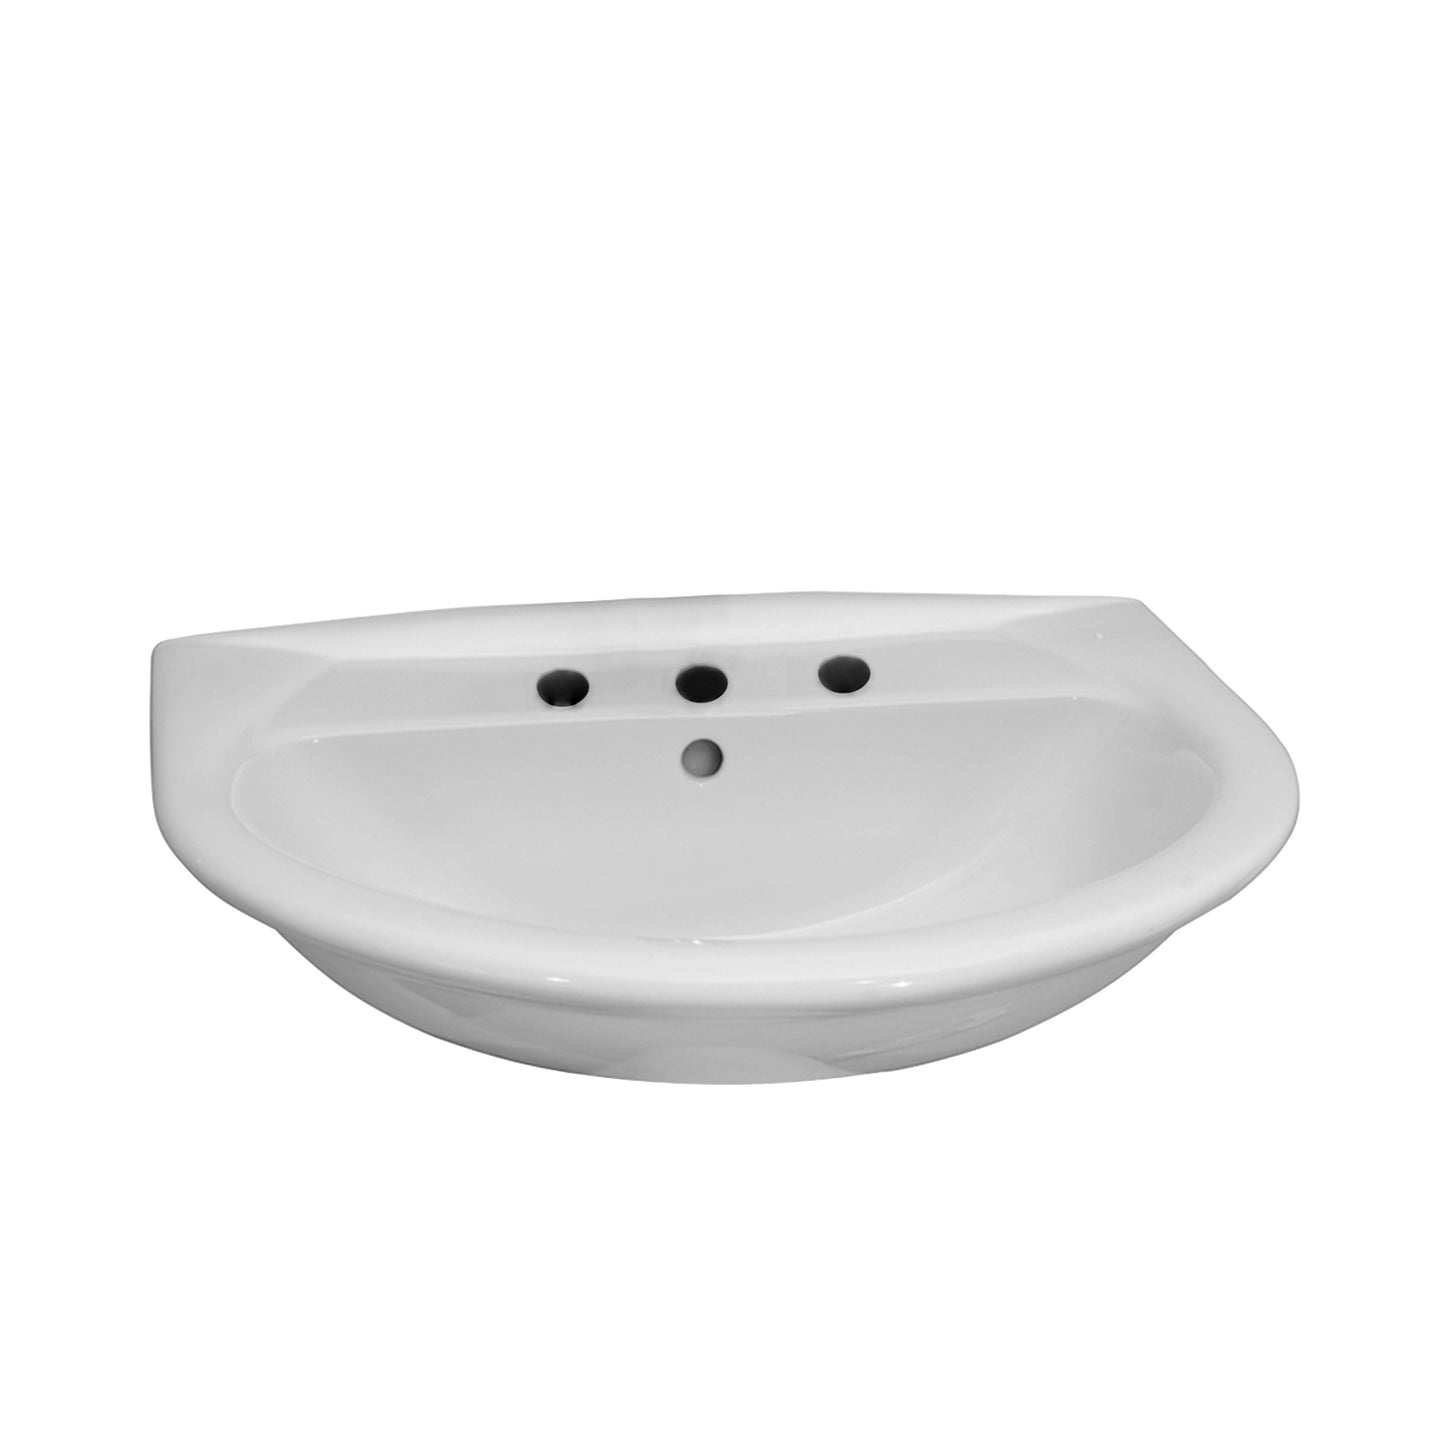 Karla 505 Wall Hung Sink for 8" Widespread and Overflow White